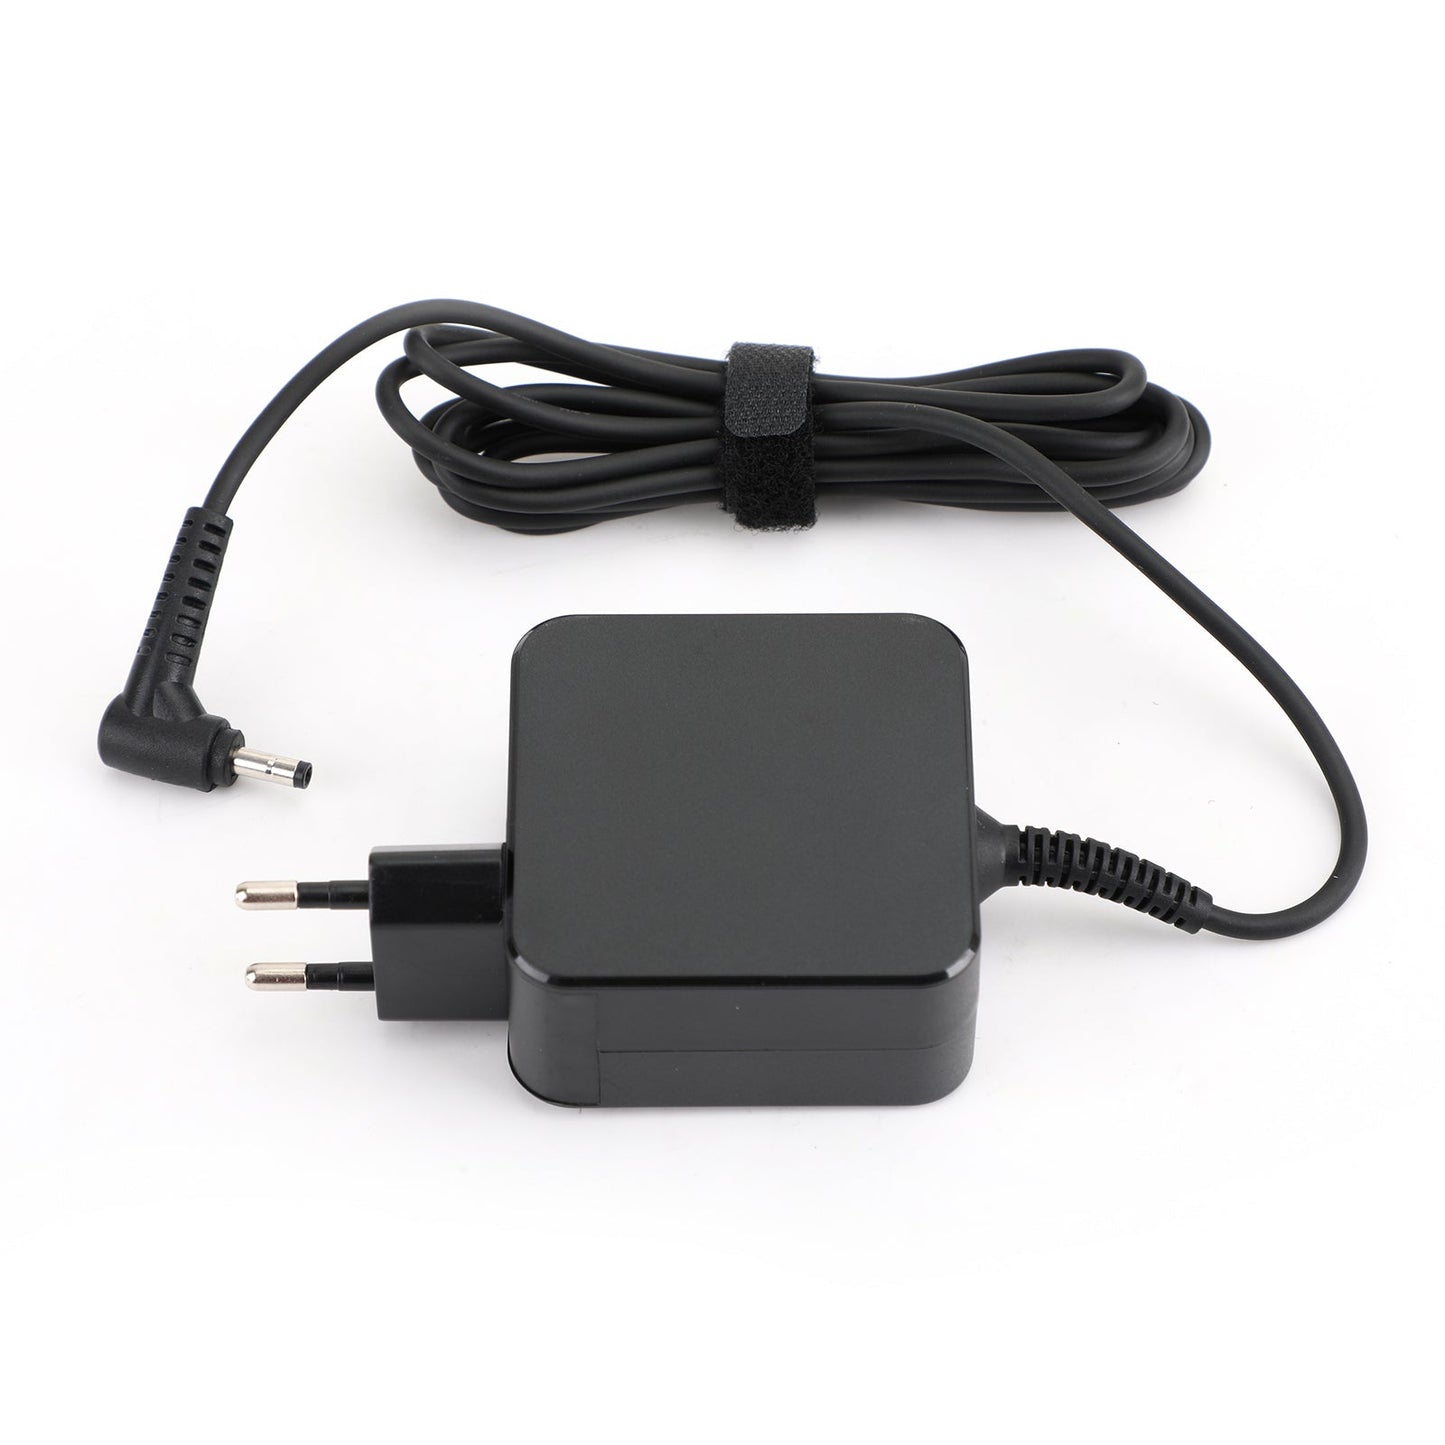 OEM Power Adapter Charger for Lenovo ideapad 100s 110s 110 310 510 510S 710 710s